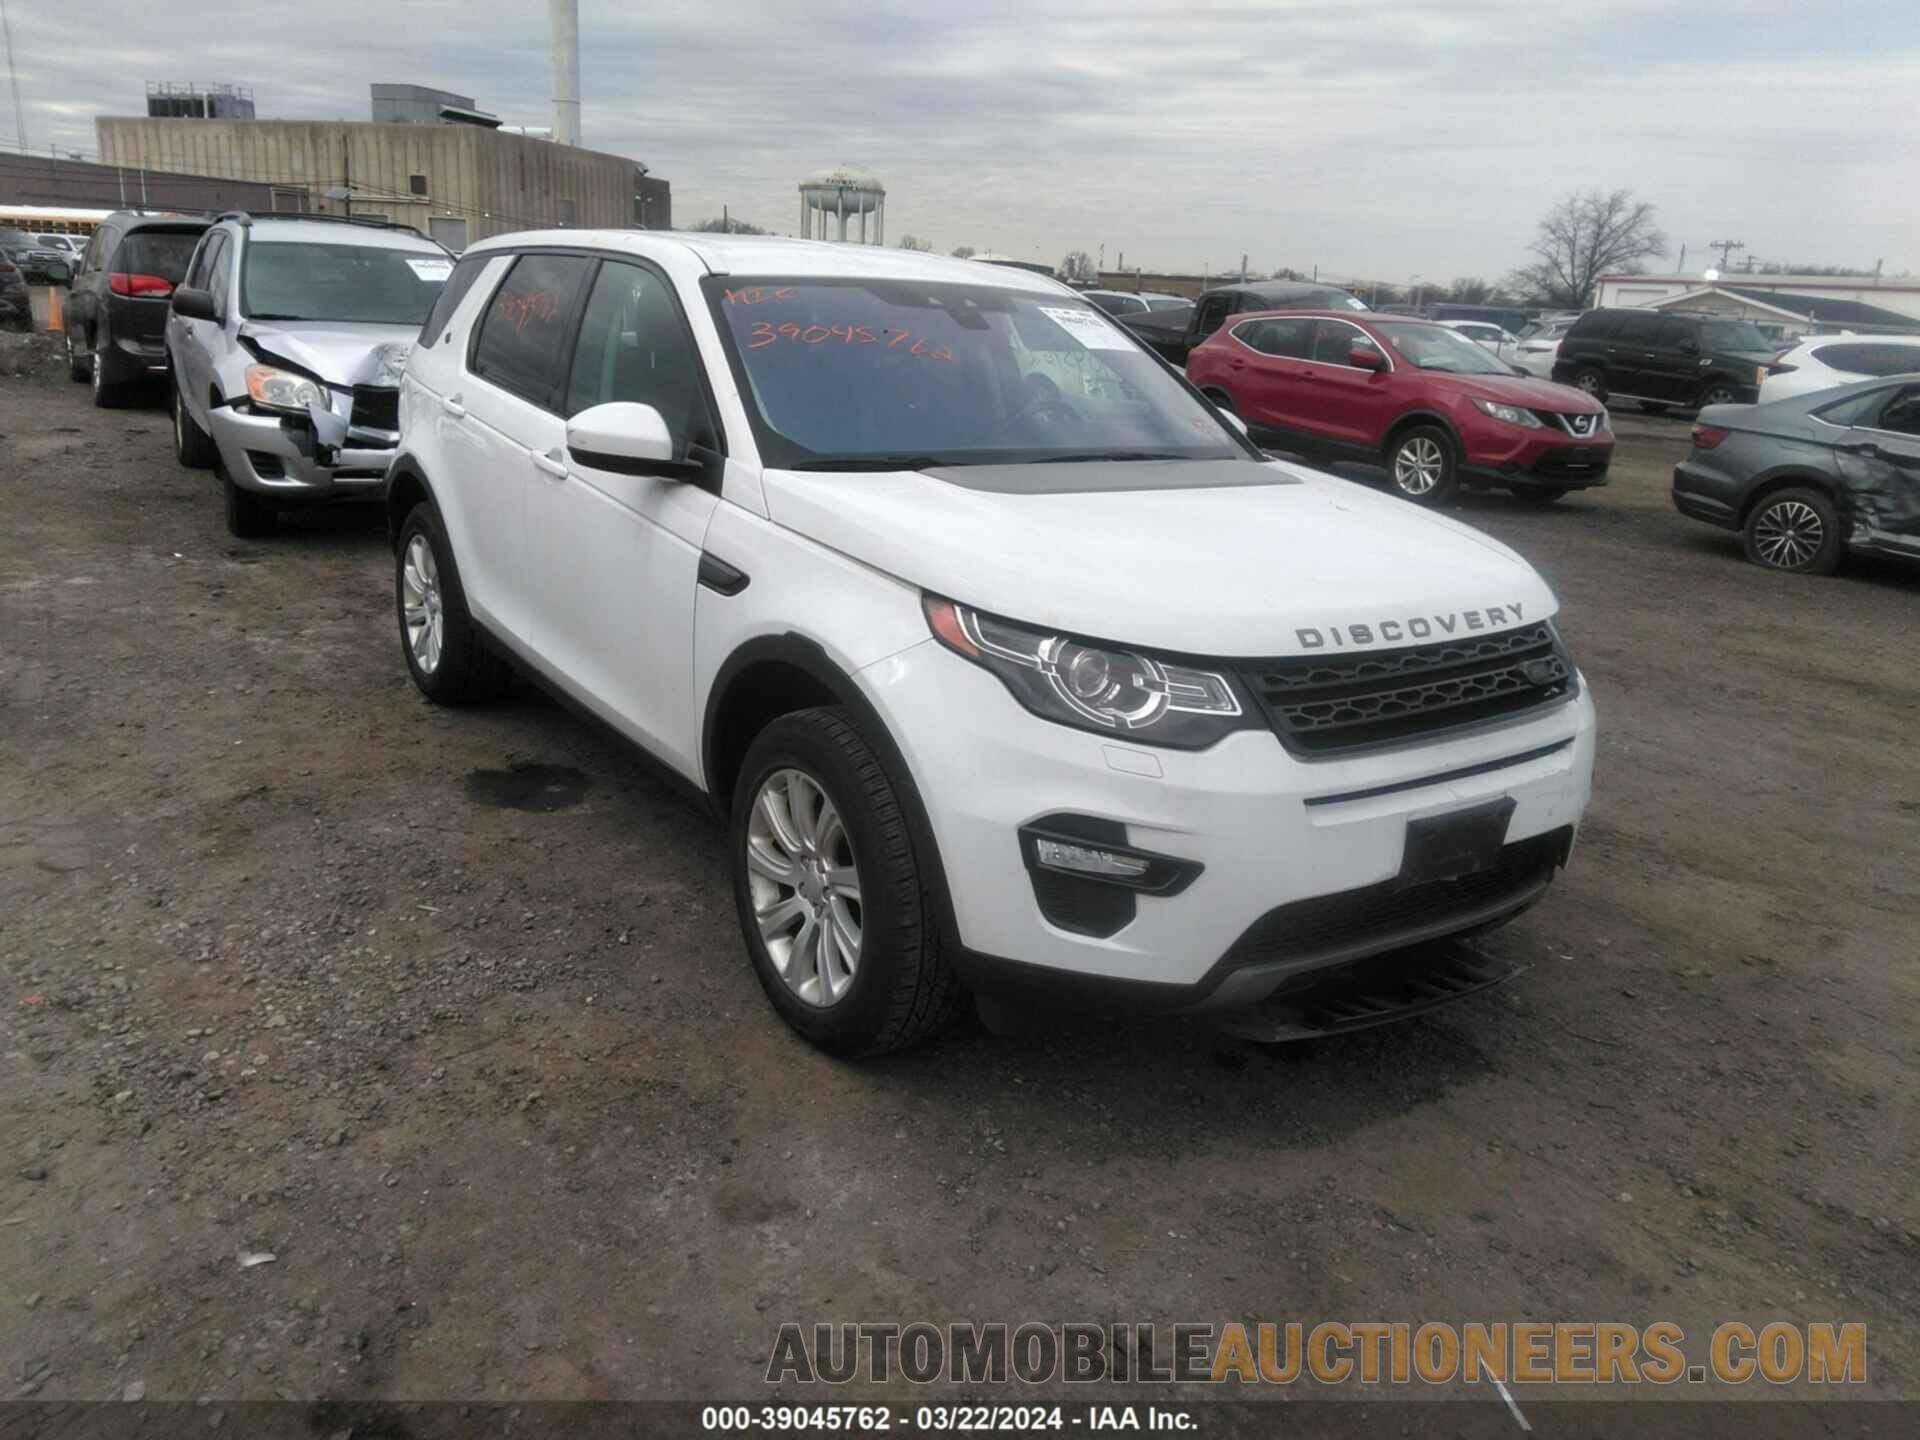 SALCP2BG3HH696275 LAND ROVER DISCOVERY SPORT 2017